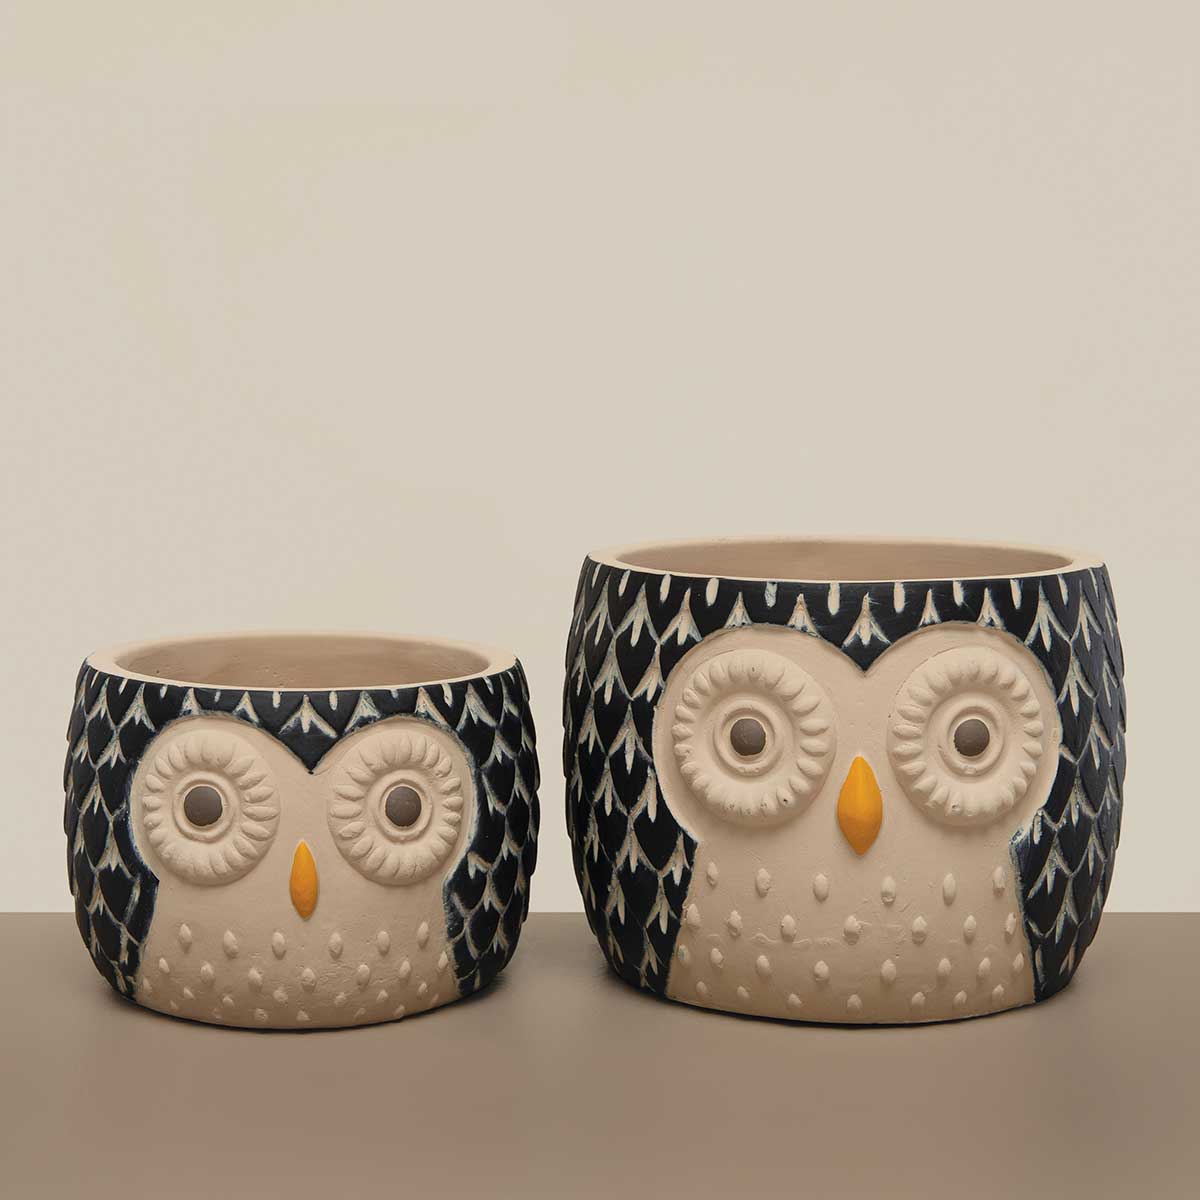 POT HOOTIE OWL LARGE 6IN X 5IN BLACK/BEIGE CONCRETE - Click Image to Close